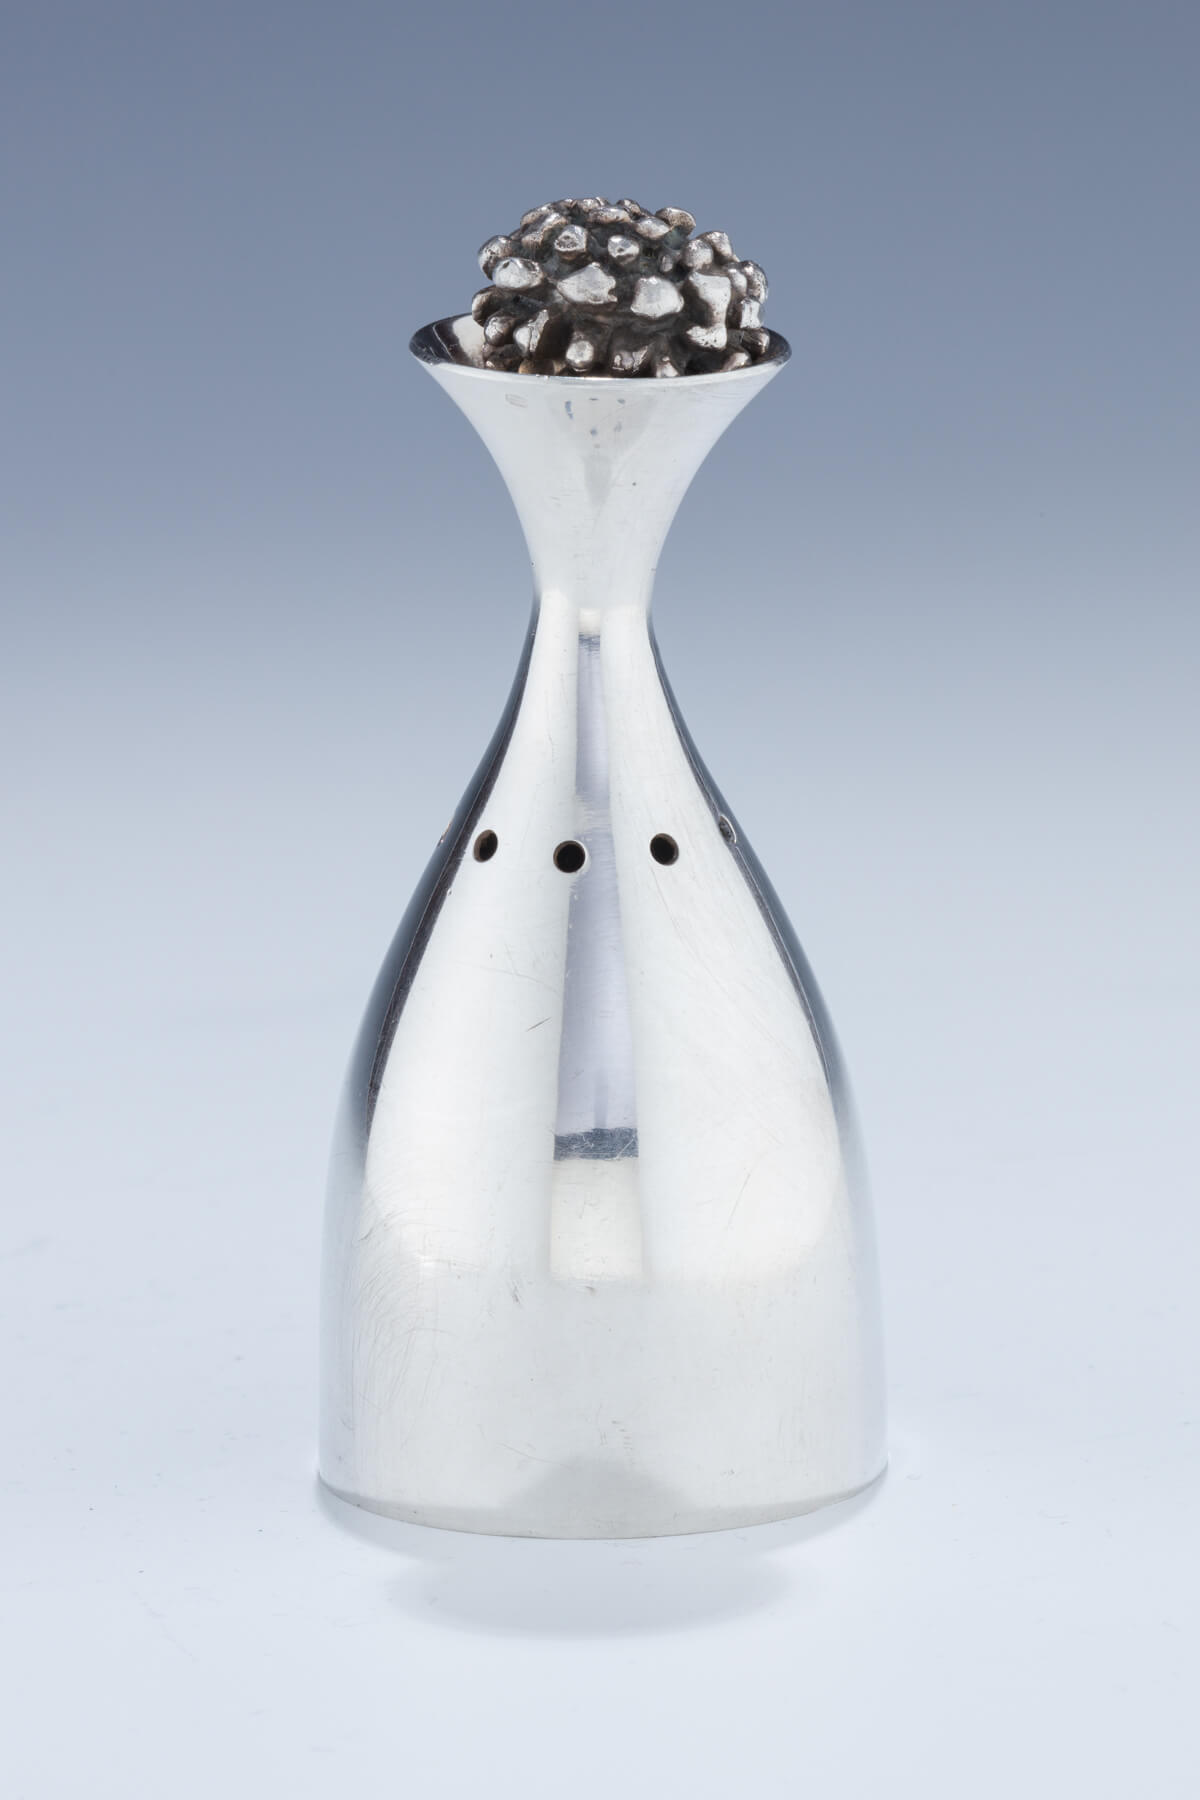 151. A Silver Spice Container by Arie Ofir